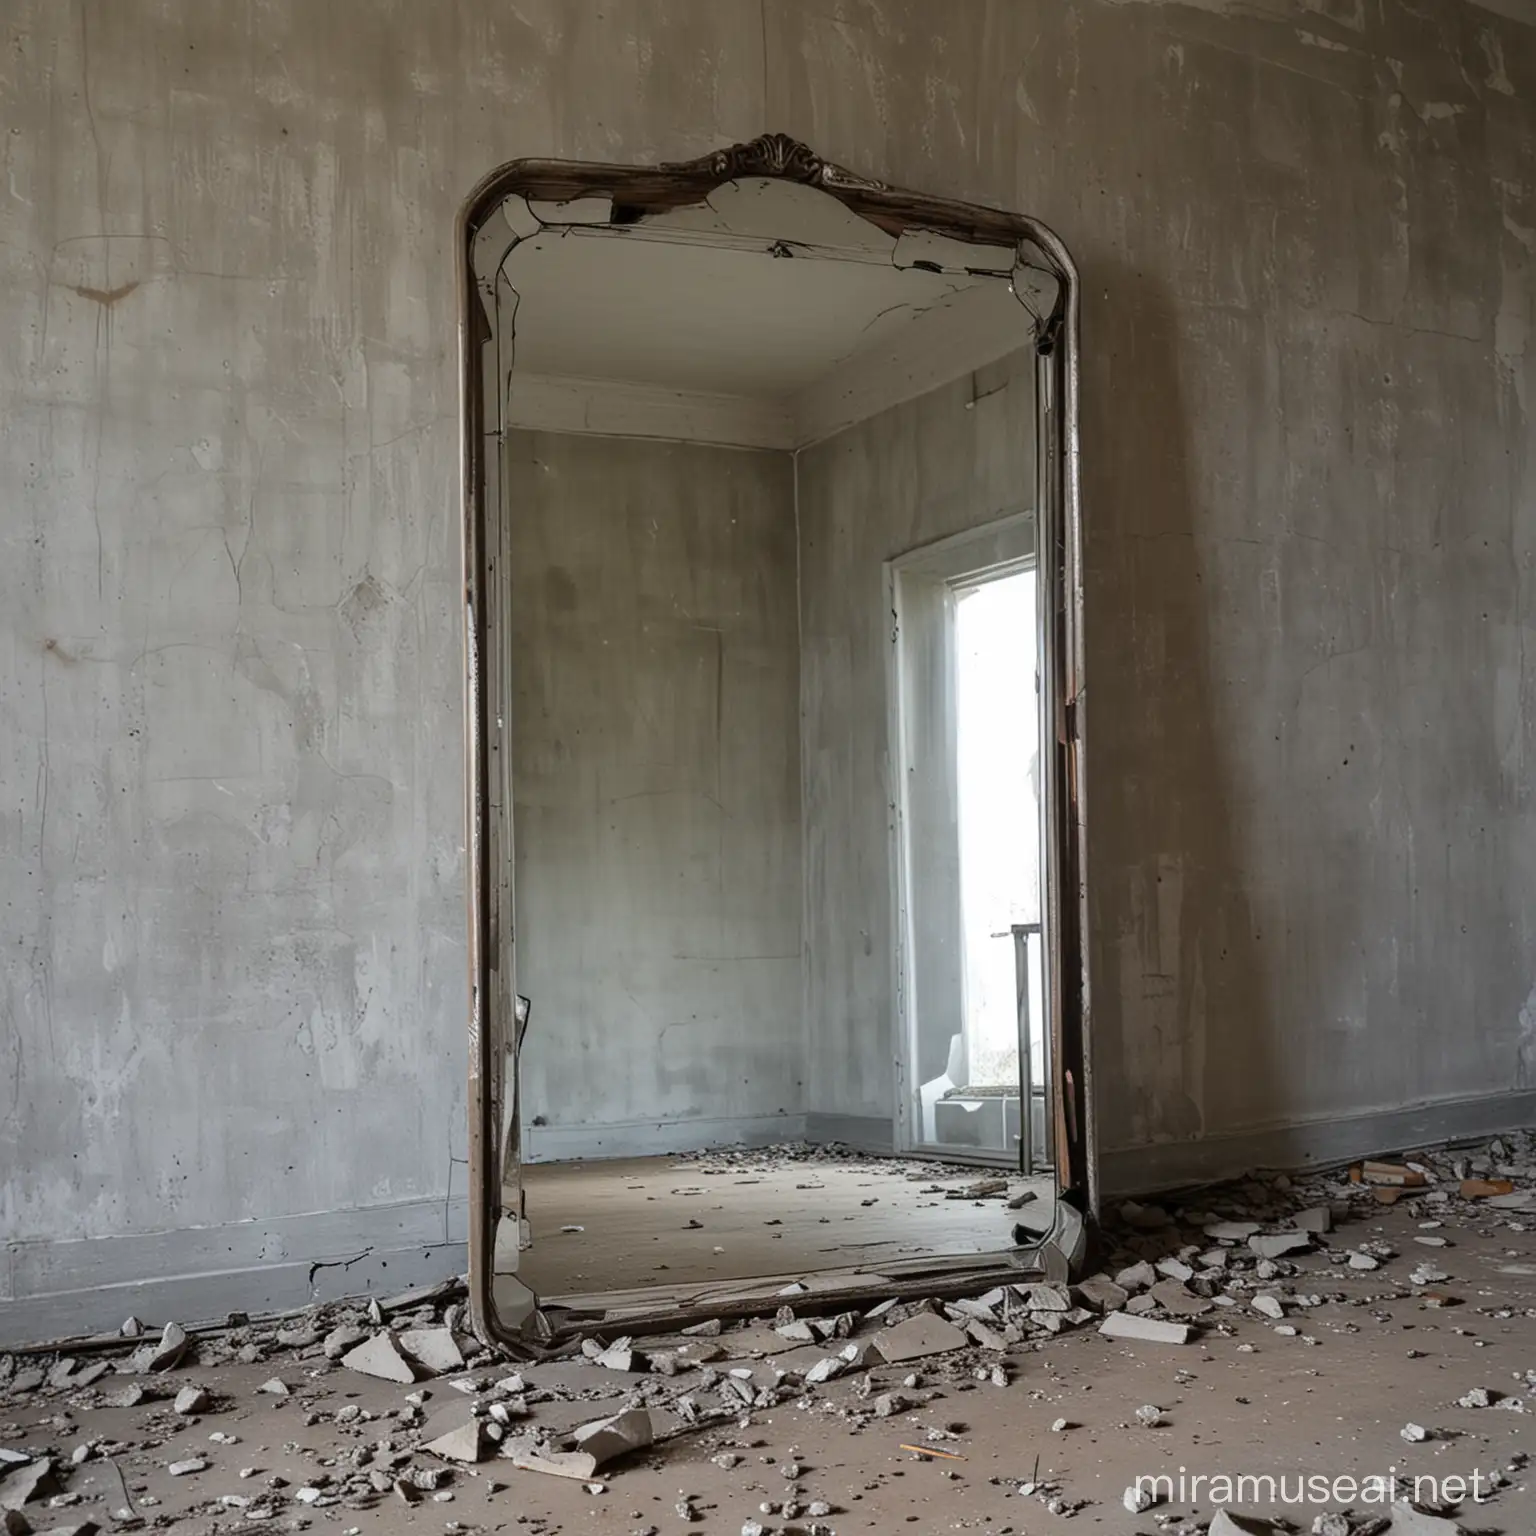 standing mirror in an abandoned building. the mirror is slightly cracked a little bit dirty. It is resting against a wall.